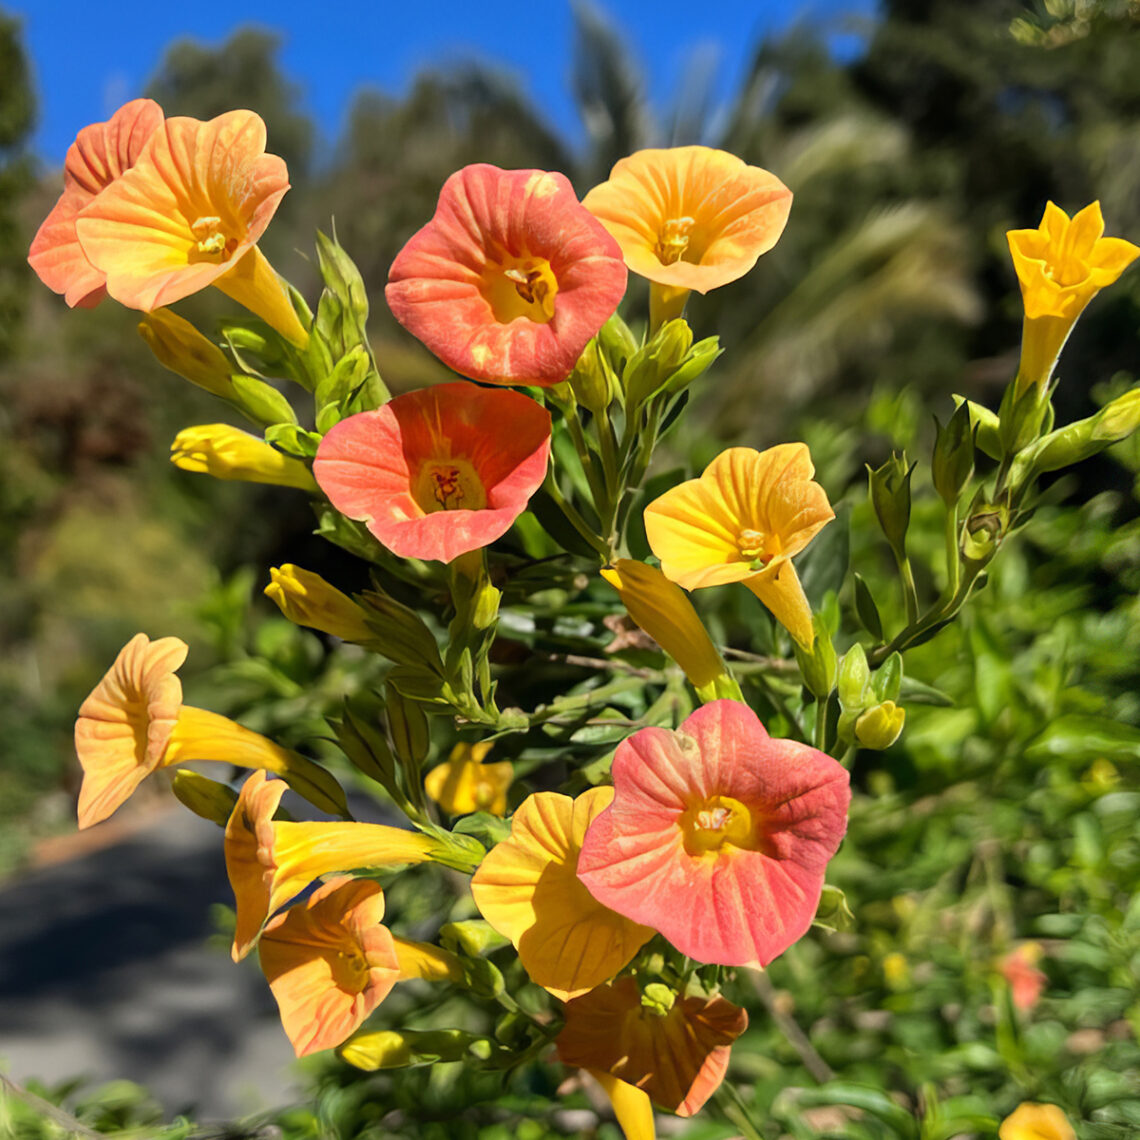 A bush with orange and yellow flowers against a background of blue sky